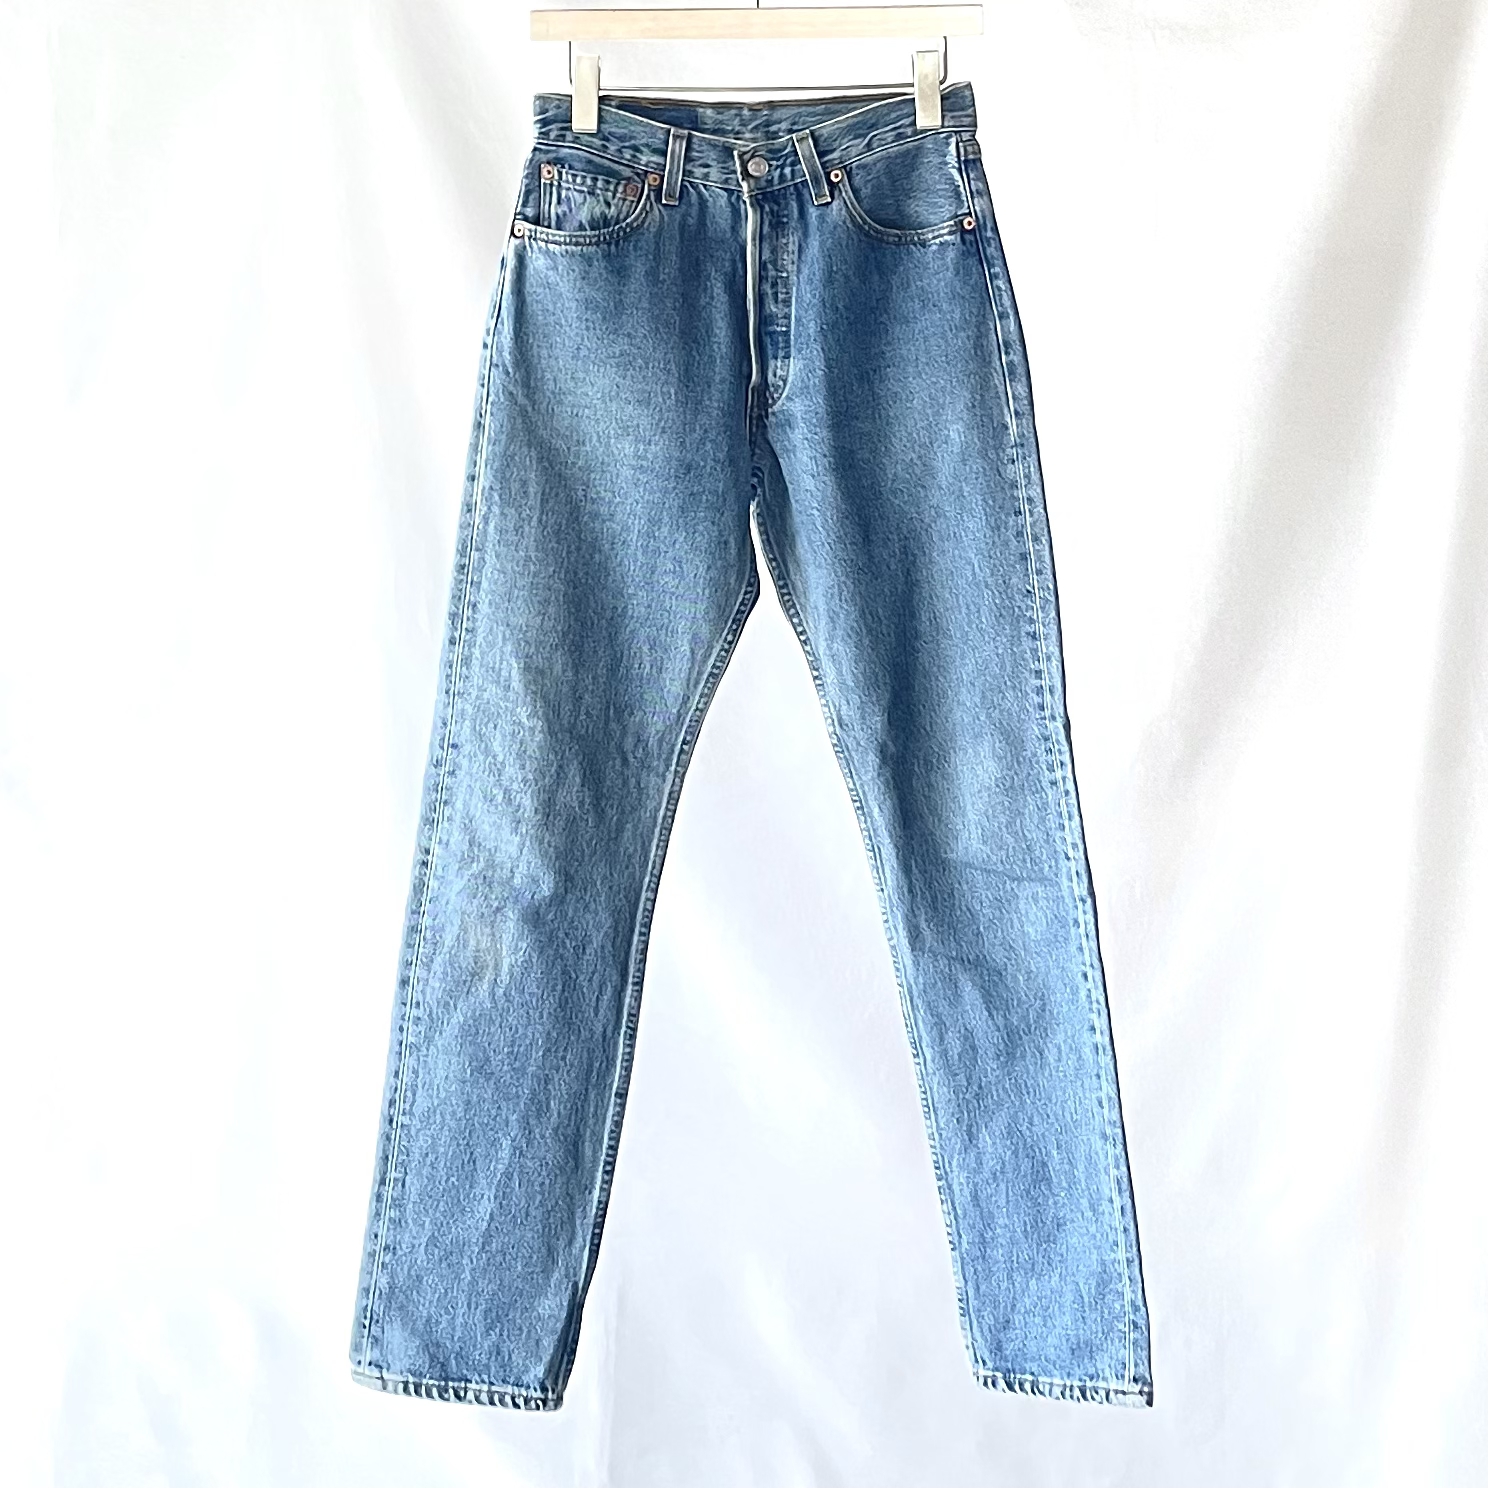 00s Made in USA Levi's 501 for women アメリカ製リーバイス 501 